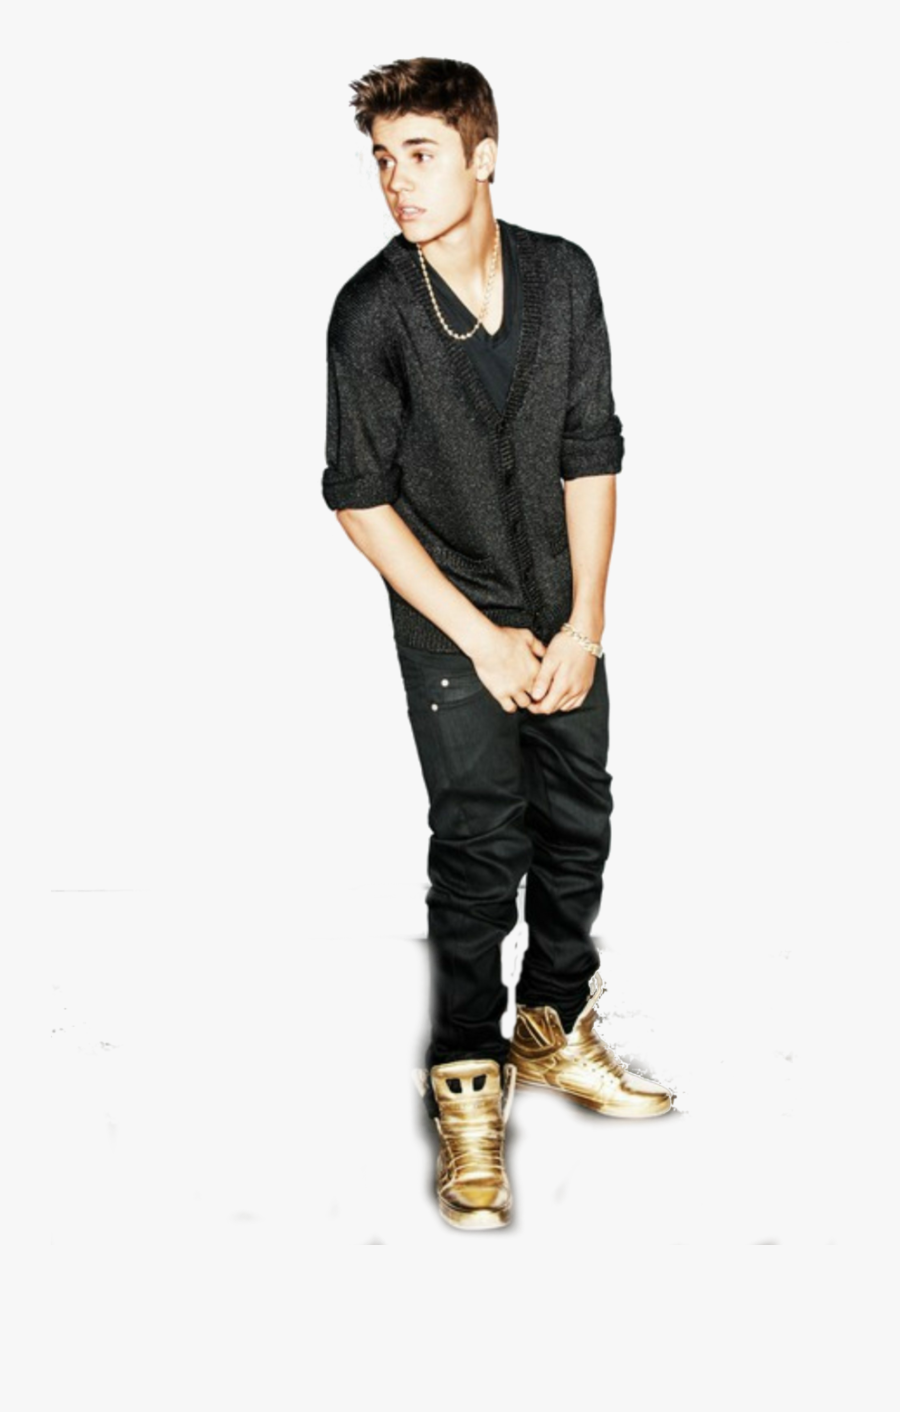 Justin Bieber Download Png - Photoshoot Justin Bieber 19 Years Old, Transparent Clipart